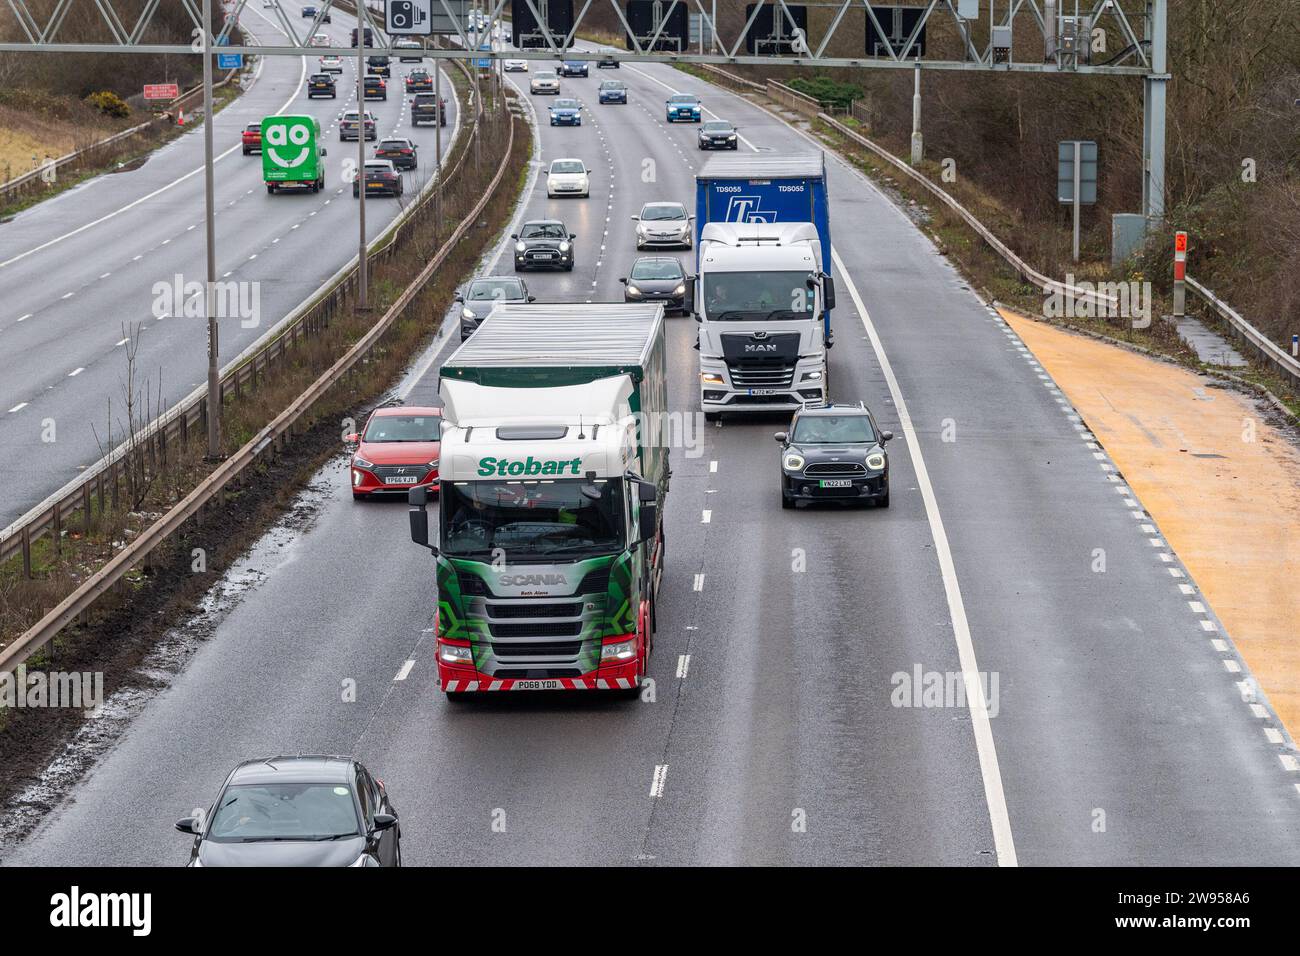 Birmingham, West Midlands, UK. 24th Dec, 2023. Despite many thousands of people making the holiday getaway on Christmas Eve, the M6 was moving freely today with no visible congestion on either carriageway. Credit: AG News/Alamy Live News Stock Photo